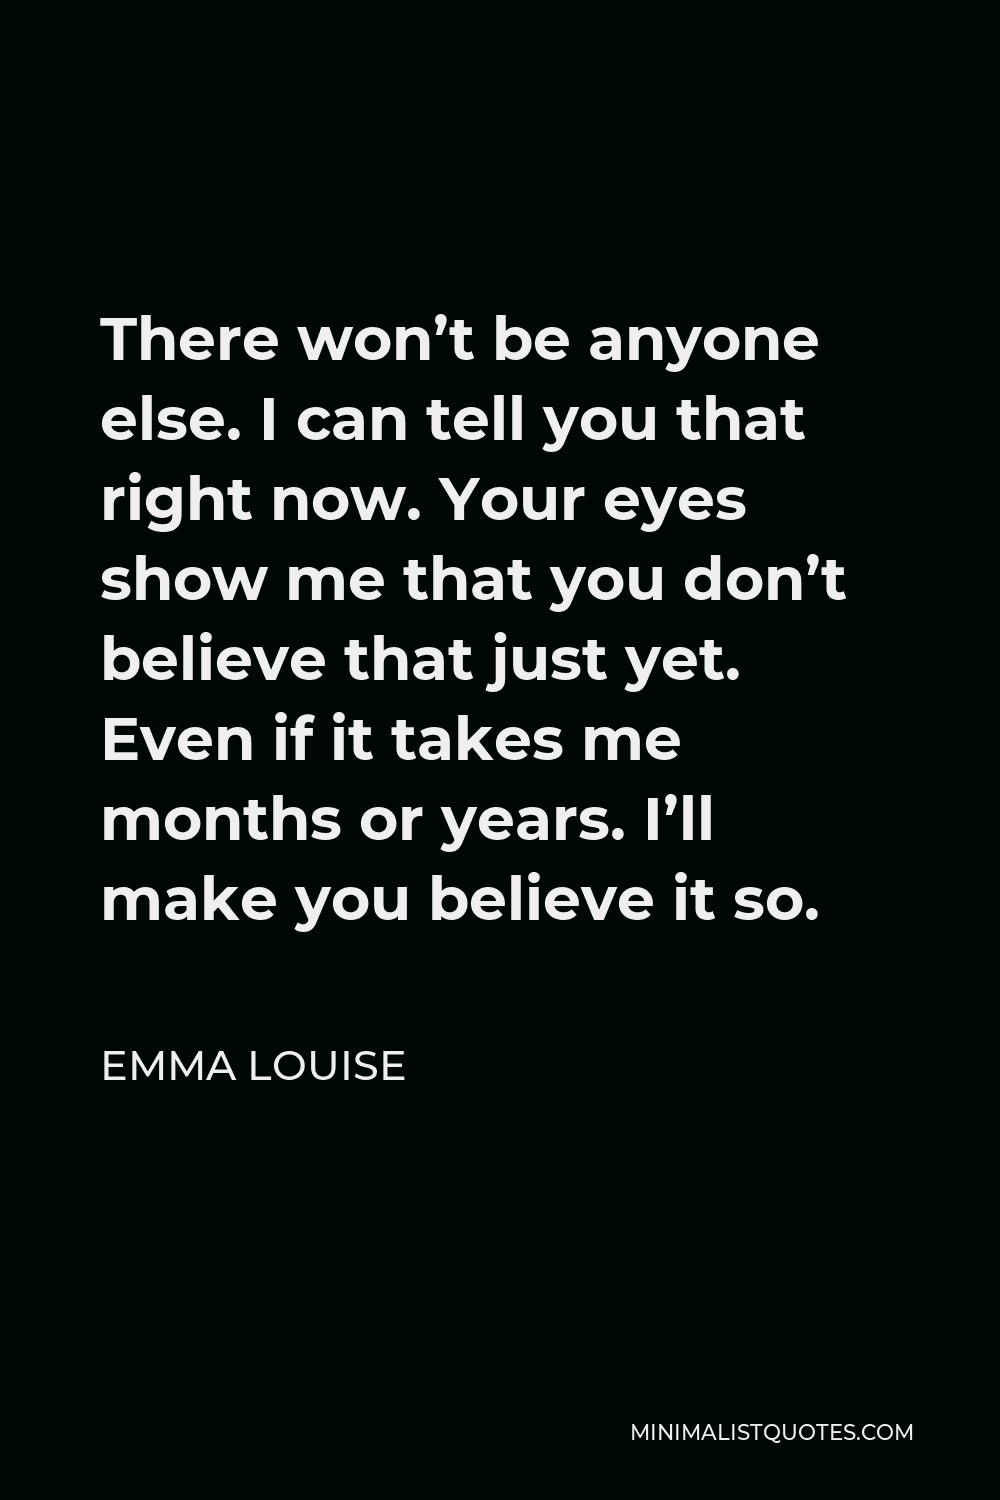 Emma Louise Quote - There won’t be anyone else. I can tell you that right now. Your eyes show me that you don’t believe that just yet. Even if it takes me months or years. I’ll make you believe it so.